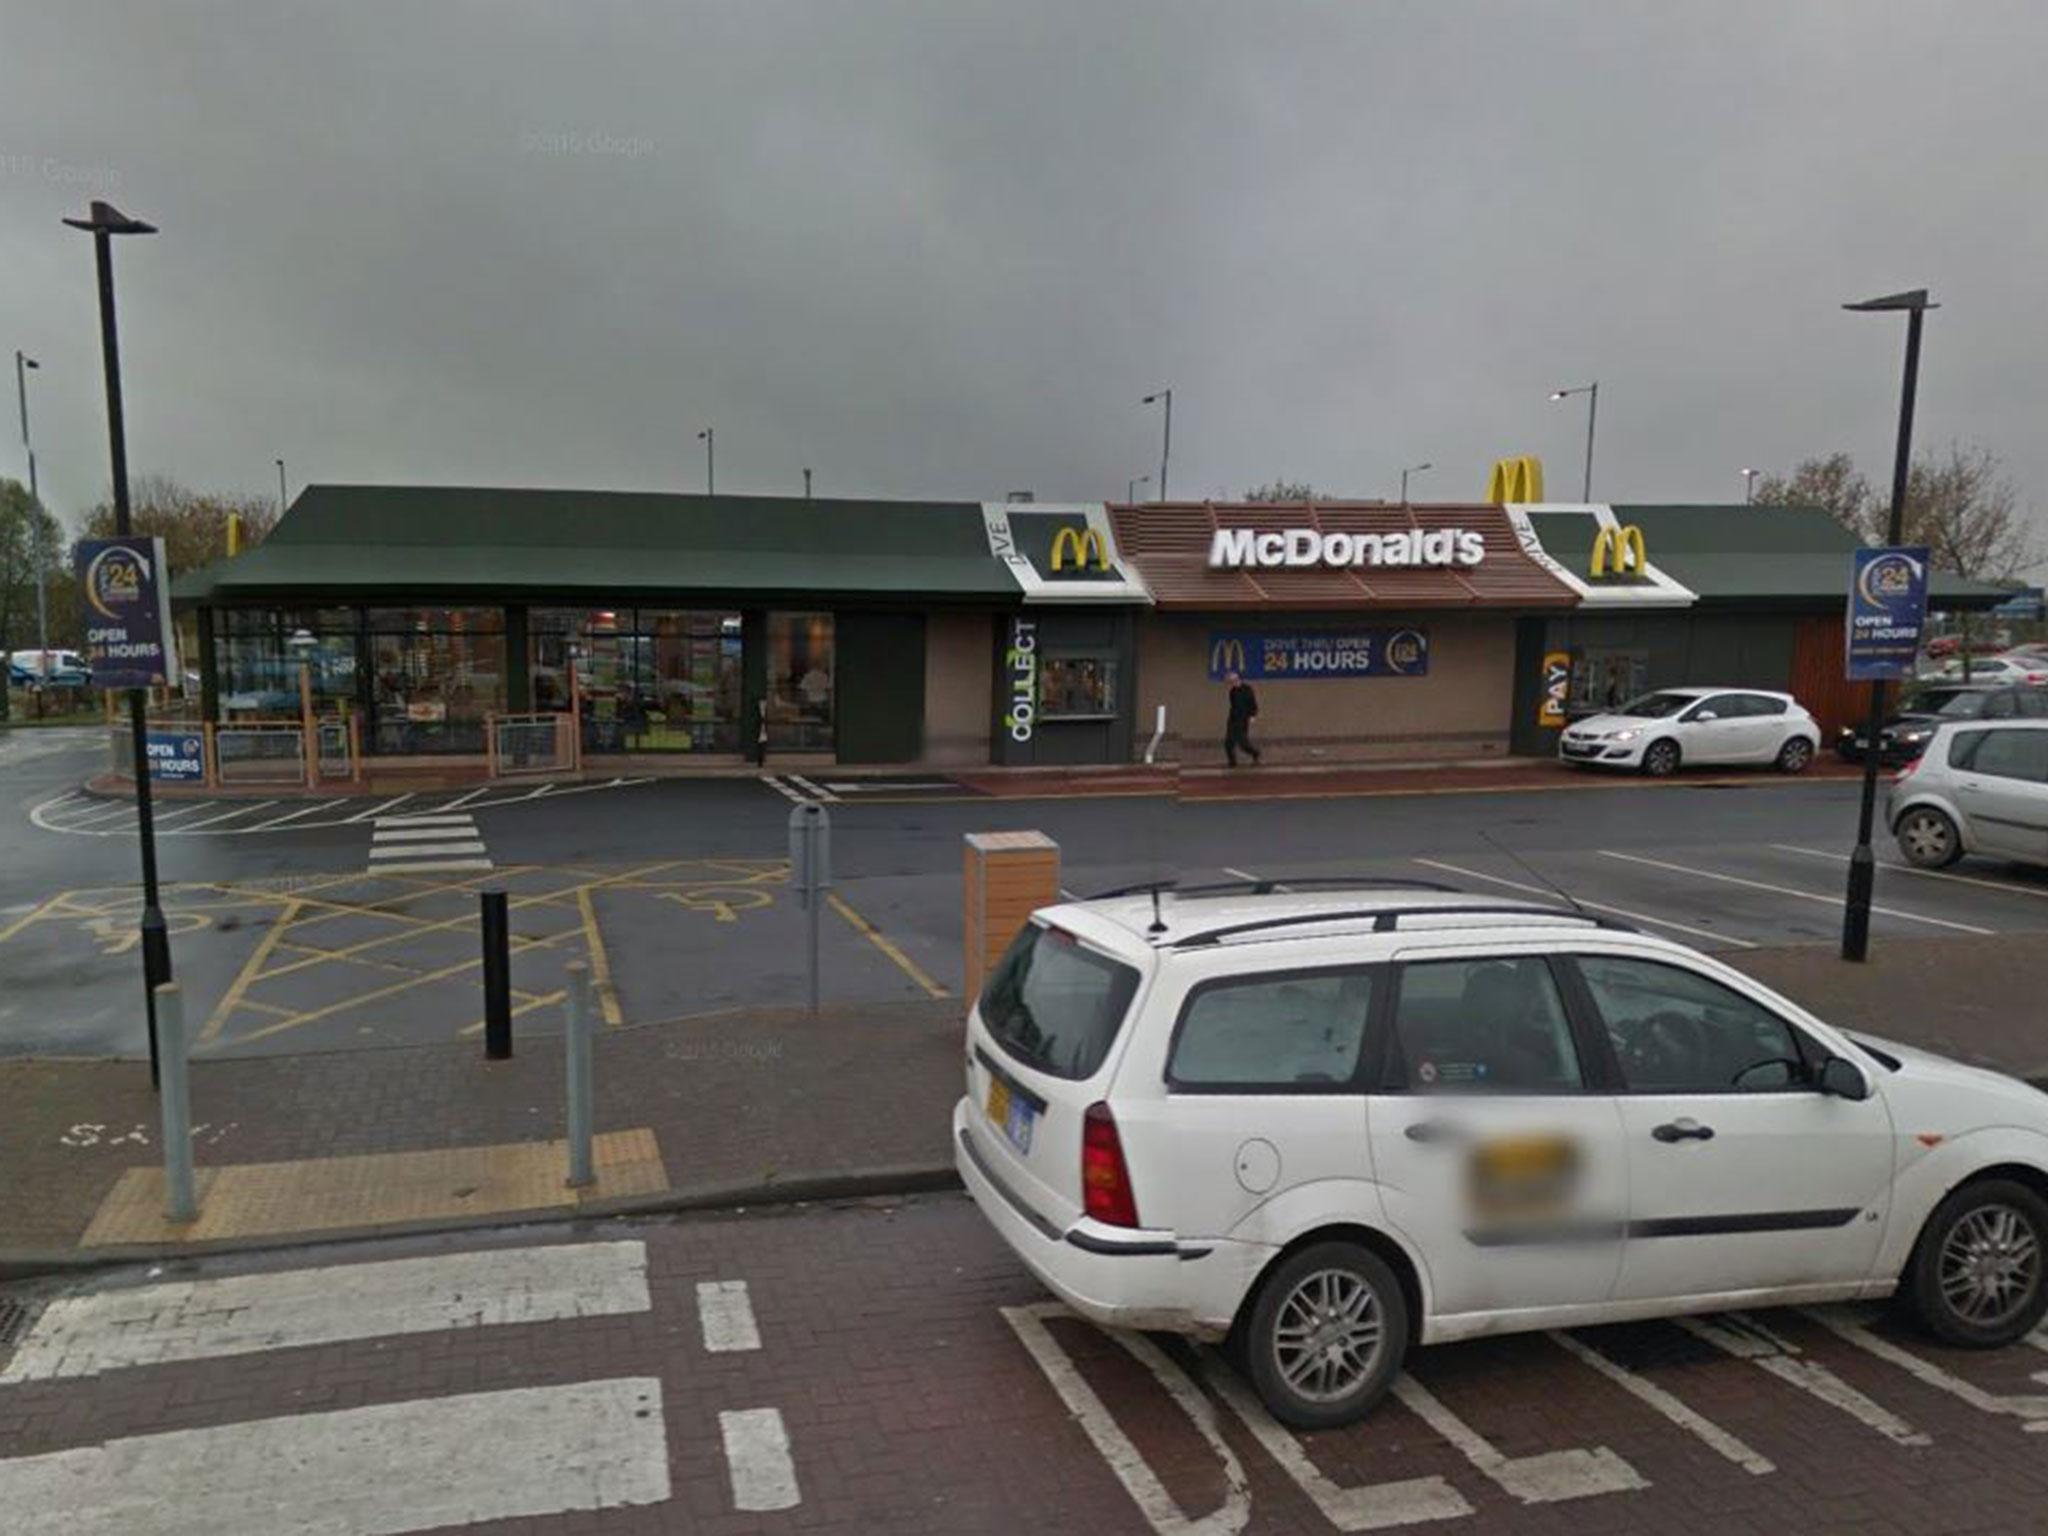 Police were called to McDonald's at Switch Island Leisure Park around 9.15am